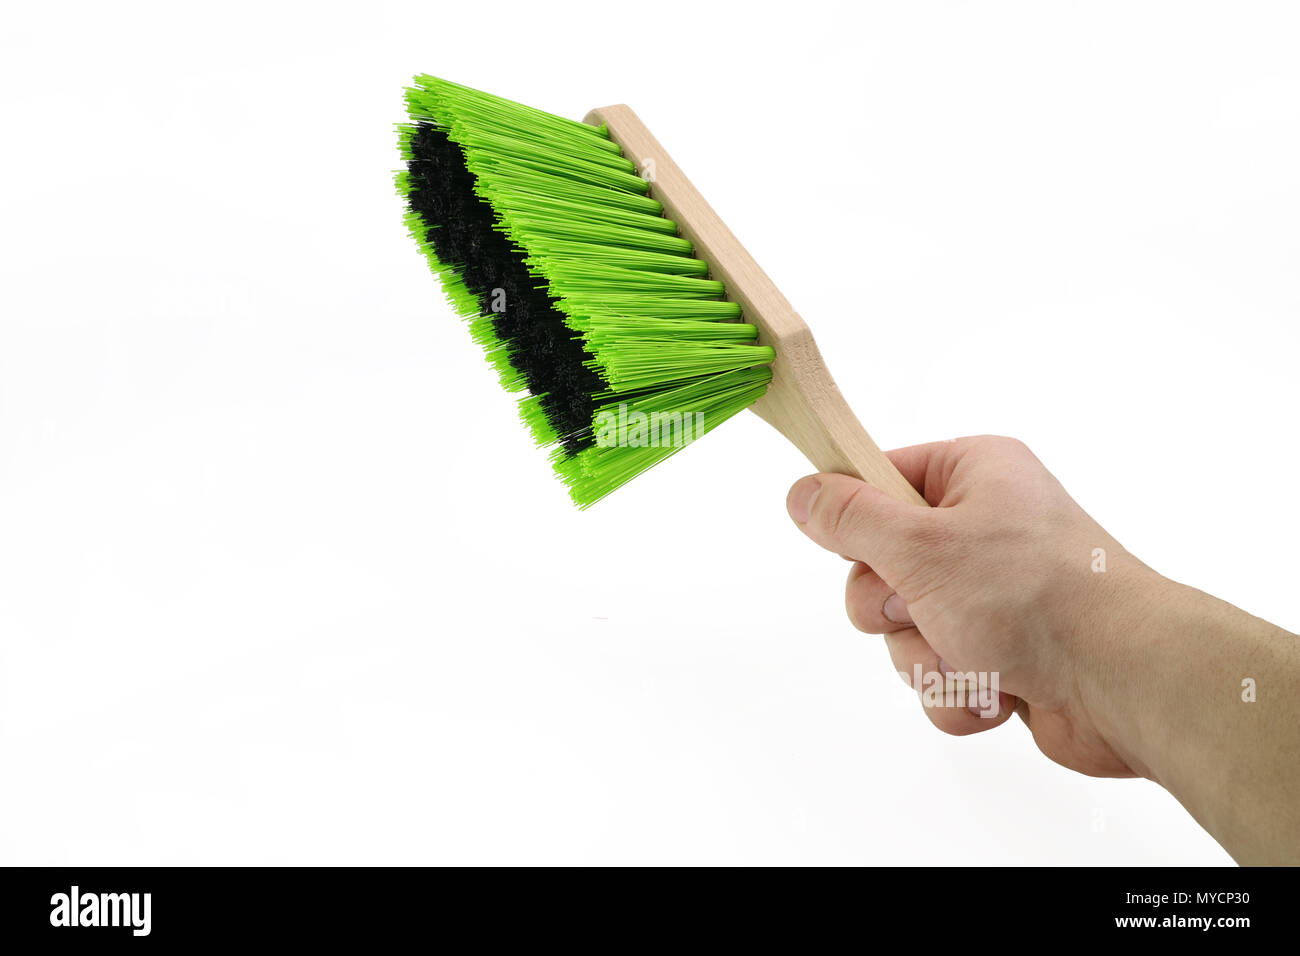 hand is holding a green dust broom isolated on white background Stock Photo